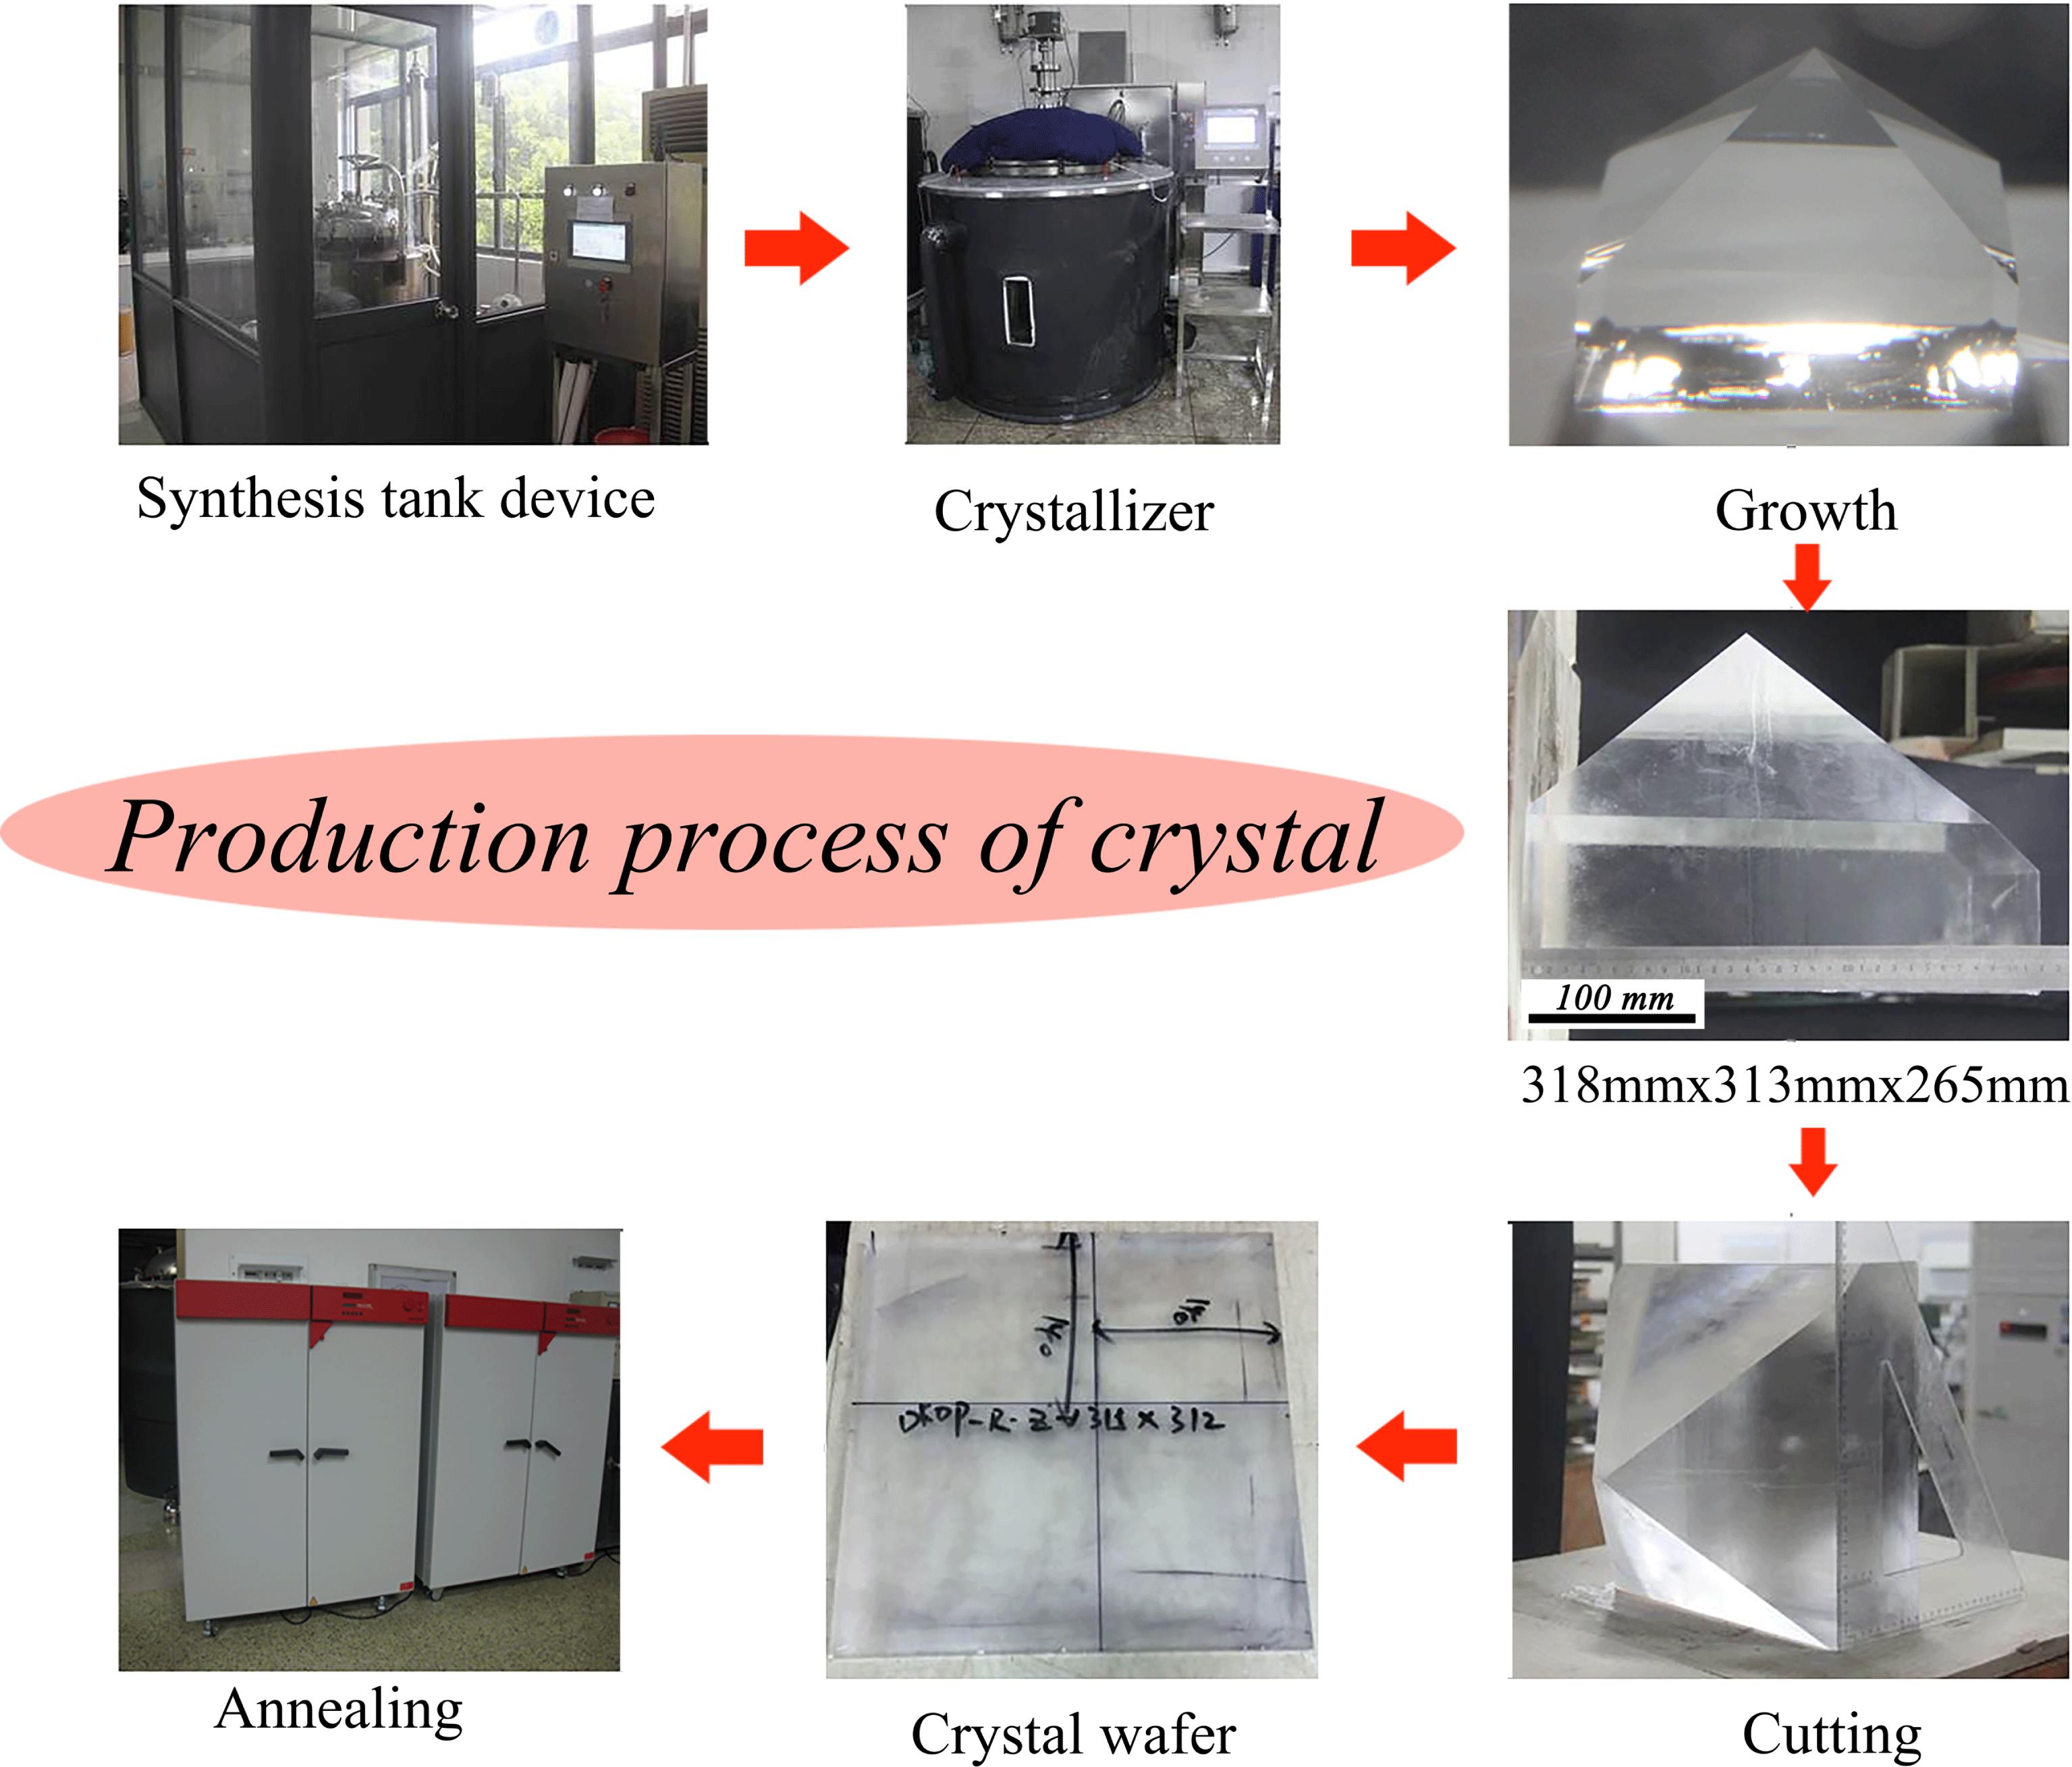 Details of the DKDP crystal production process, including synthesis, growth, cutting and annealing.